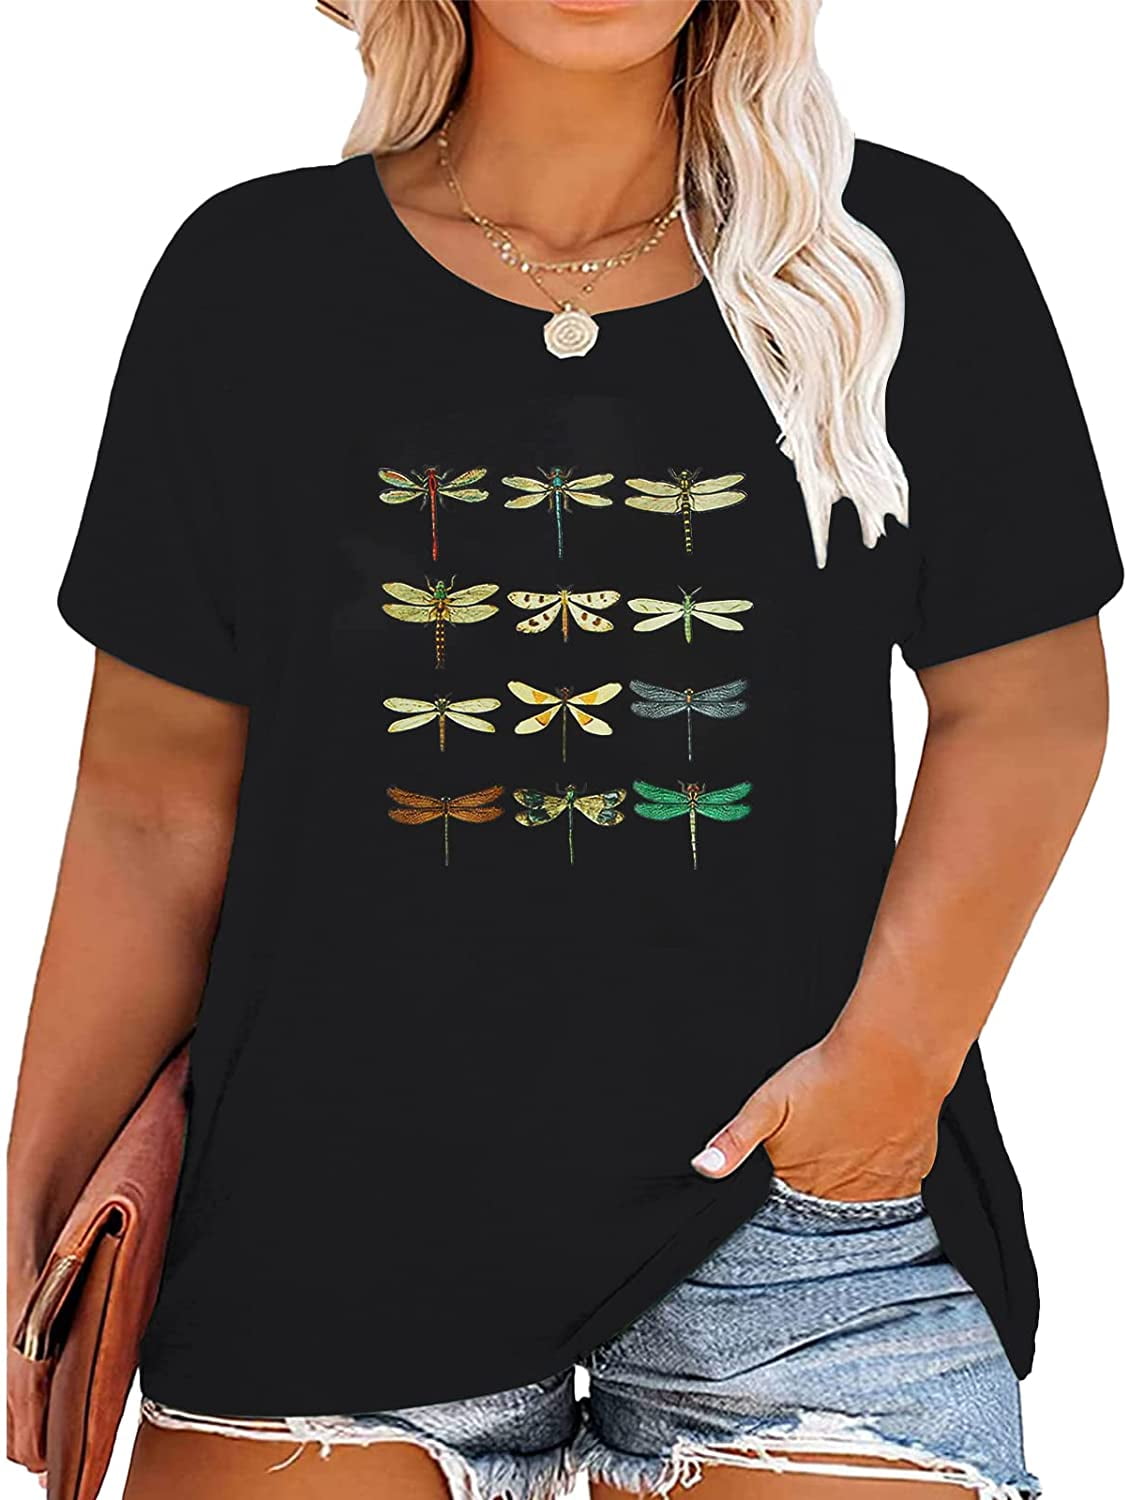 Anbech Women's Dragonfly Tee Shirts Plus Size Graphic Tshirts Flower ...